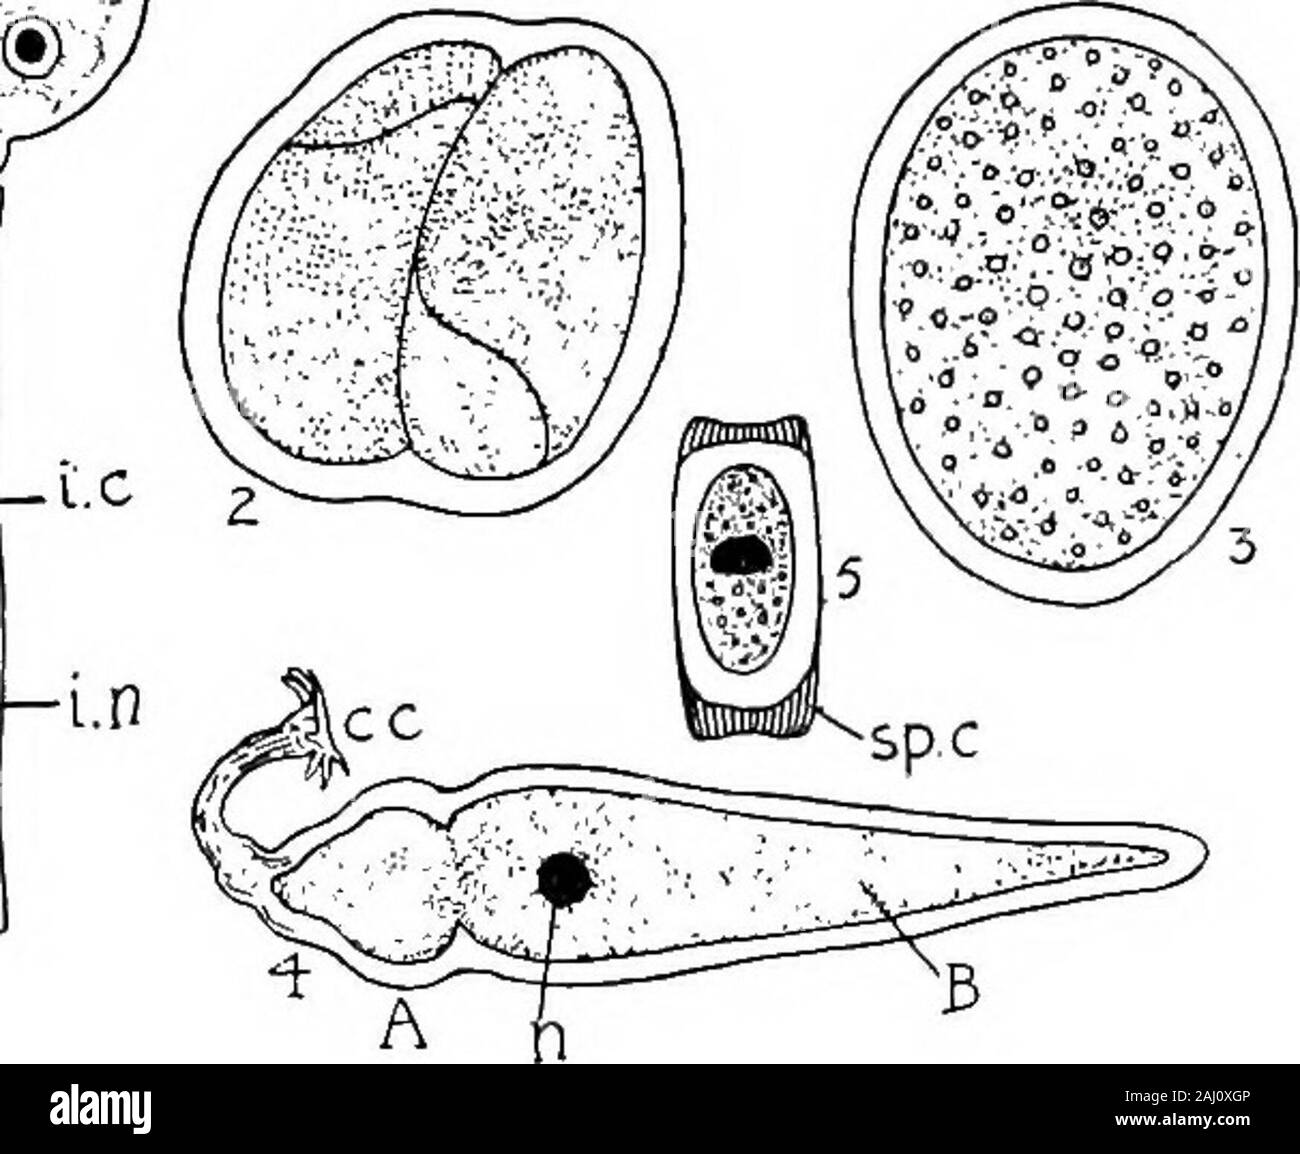 Outlines of zoology . entually, inthe alimentary canal of another earthworm the cyst bursts,the spore-cases are extruded, the spores emerge from theirfirm chitinoid cases. The young spore (sporozoite) is likea bent spindle (falciform), and seems next door to beingflagellate. It bores into a mother sperm cell, and from thisit afterwards passes as an adult into the cavity of theseminal vesicles. Intracellular parasitism and copious foodnaturally act as checks to activity, and the adult is sluggish.The allies of Monocystis occur chiefly in Worms,Tunicates, and Arthropods; none are known in Verteb Stock Photo